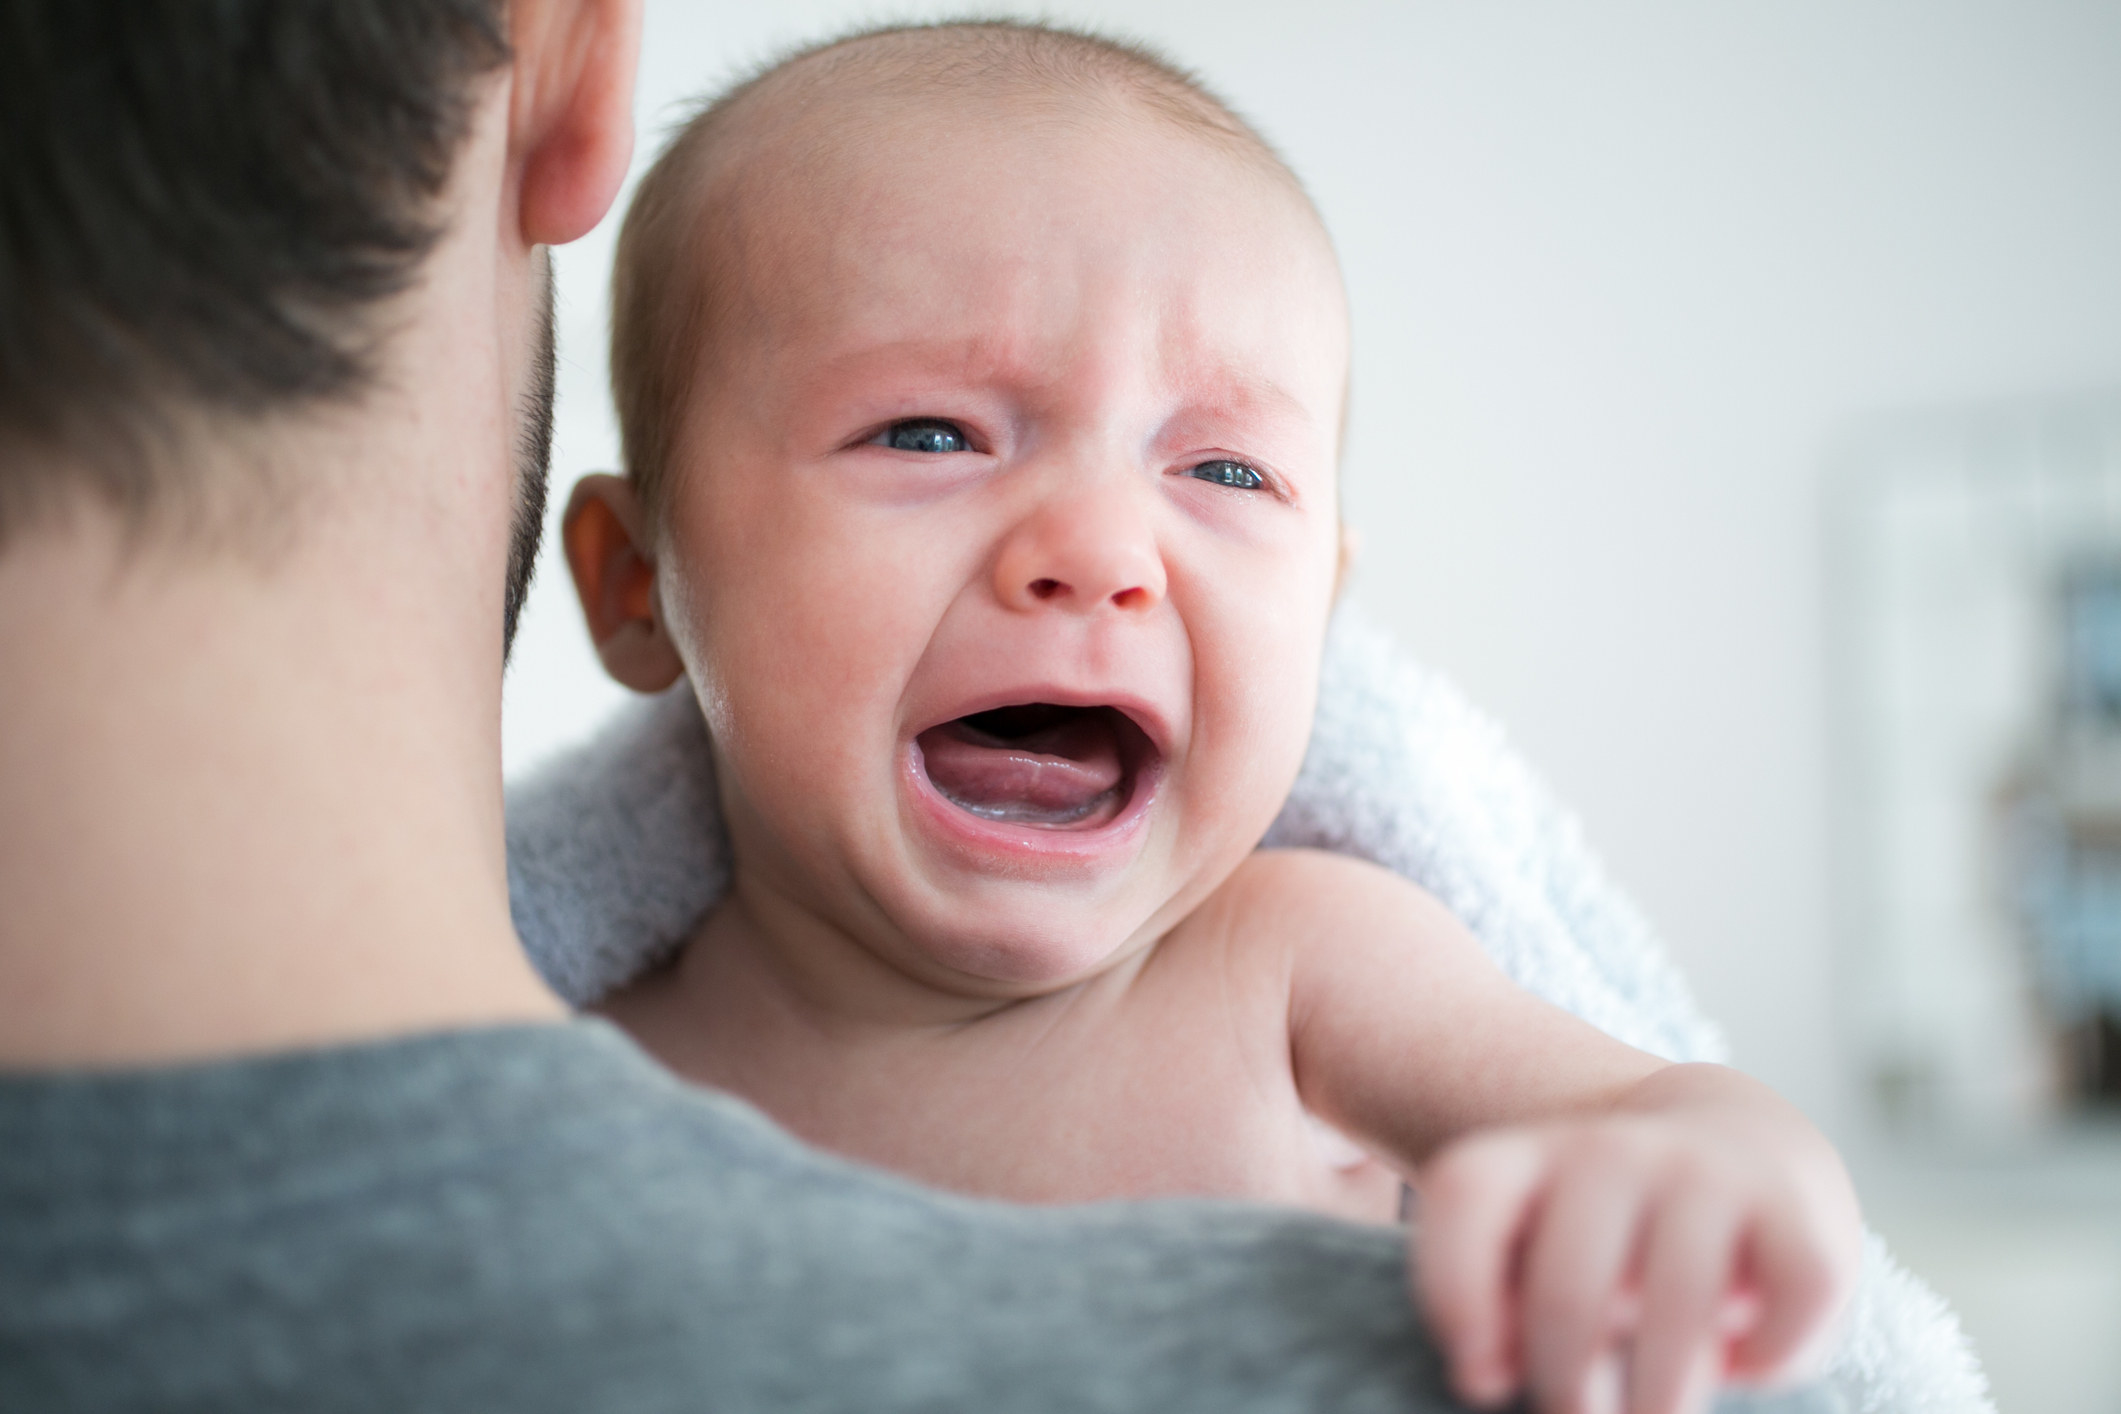 A man holds a crying baby.